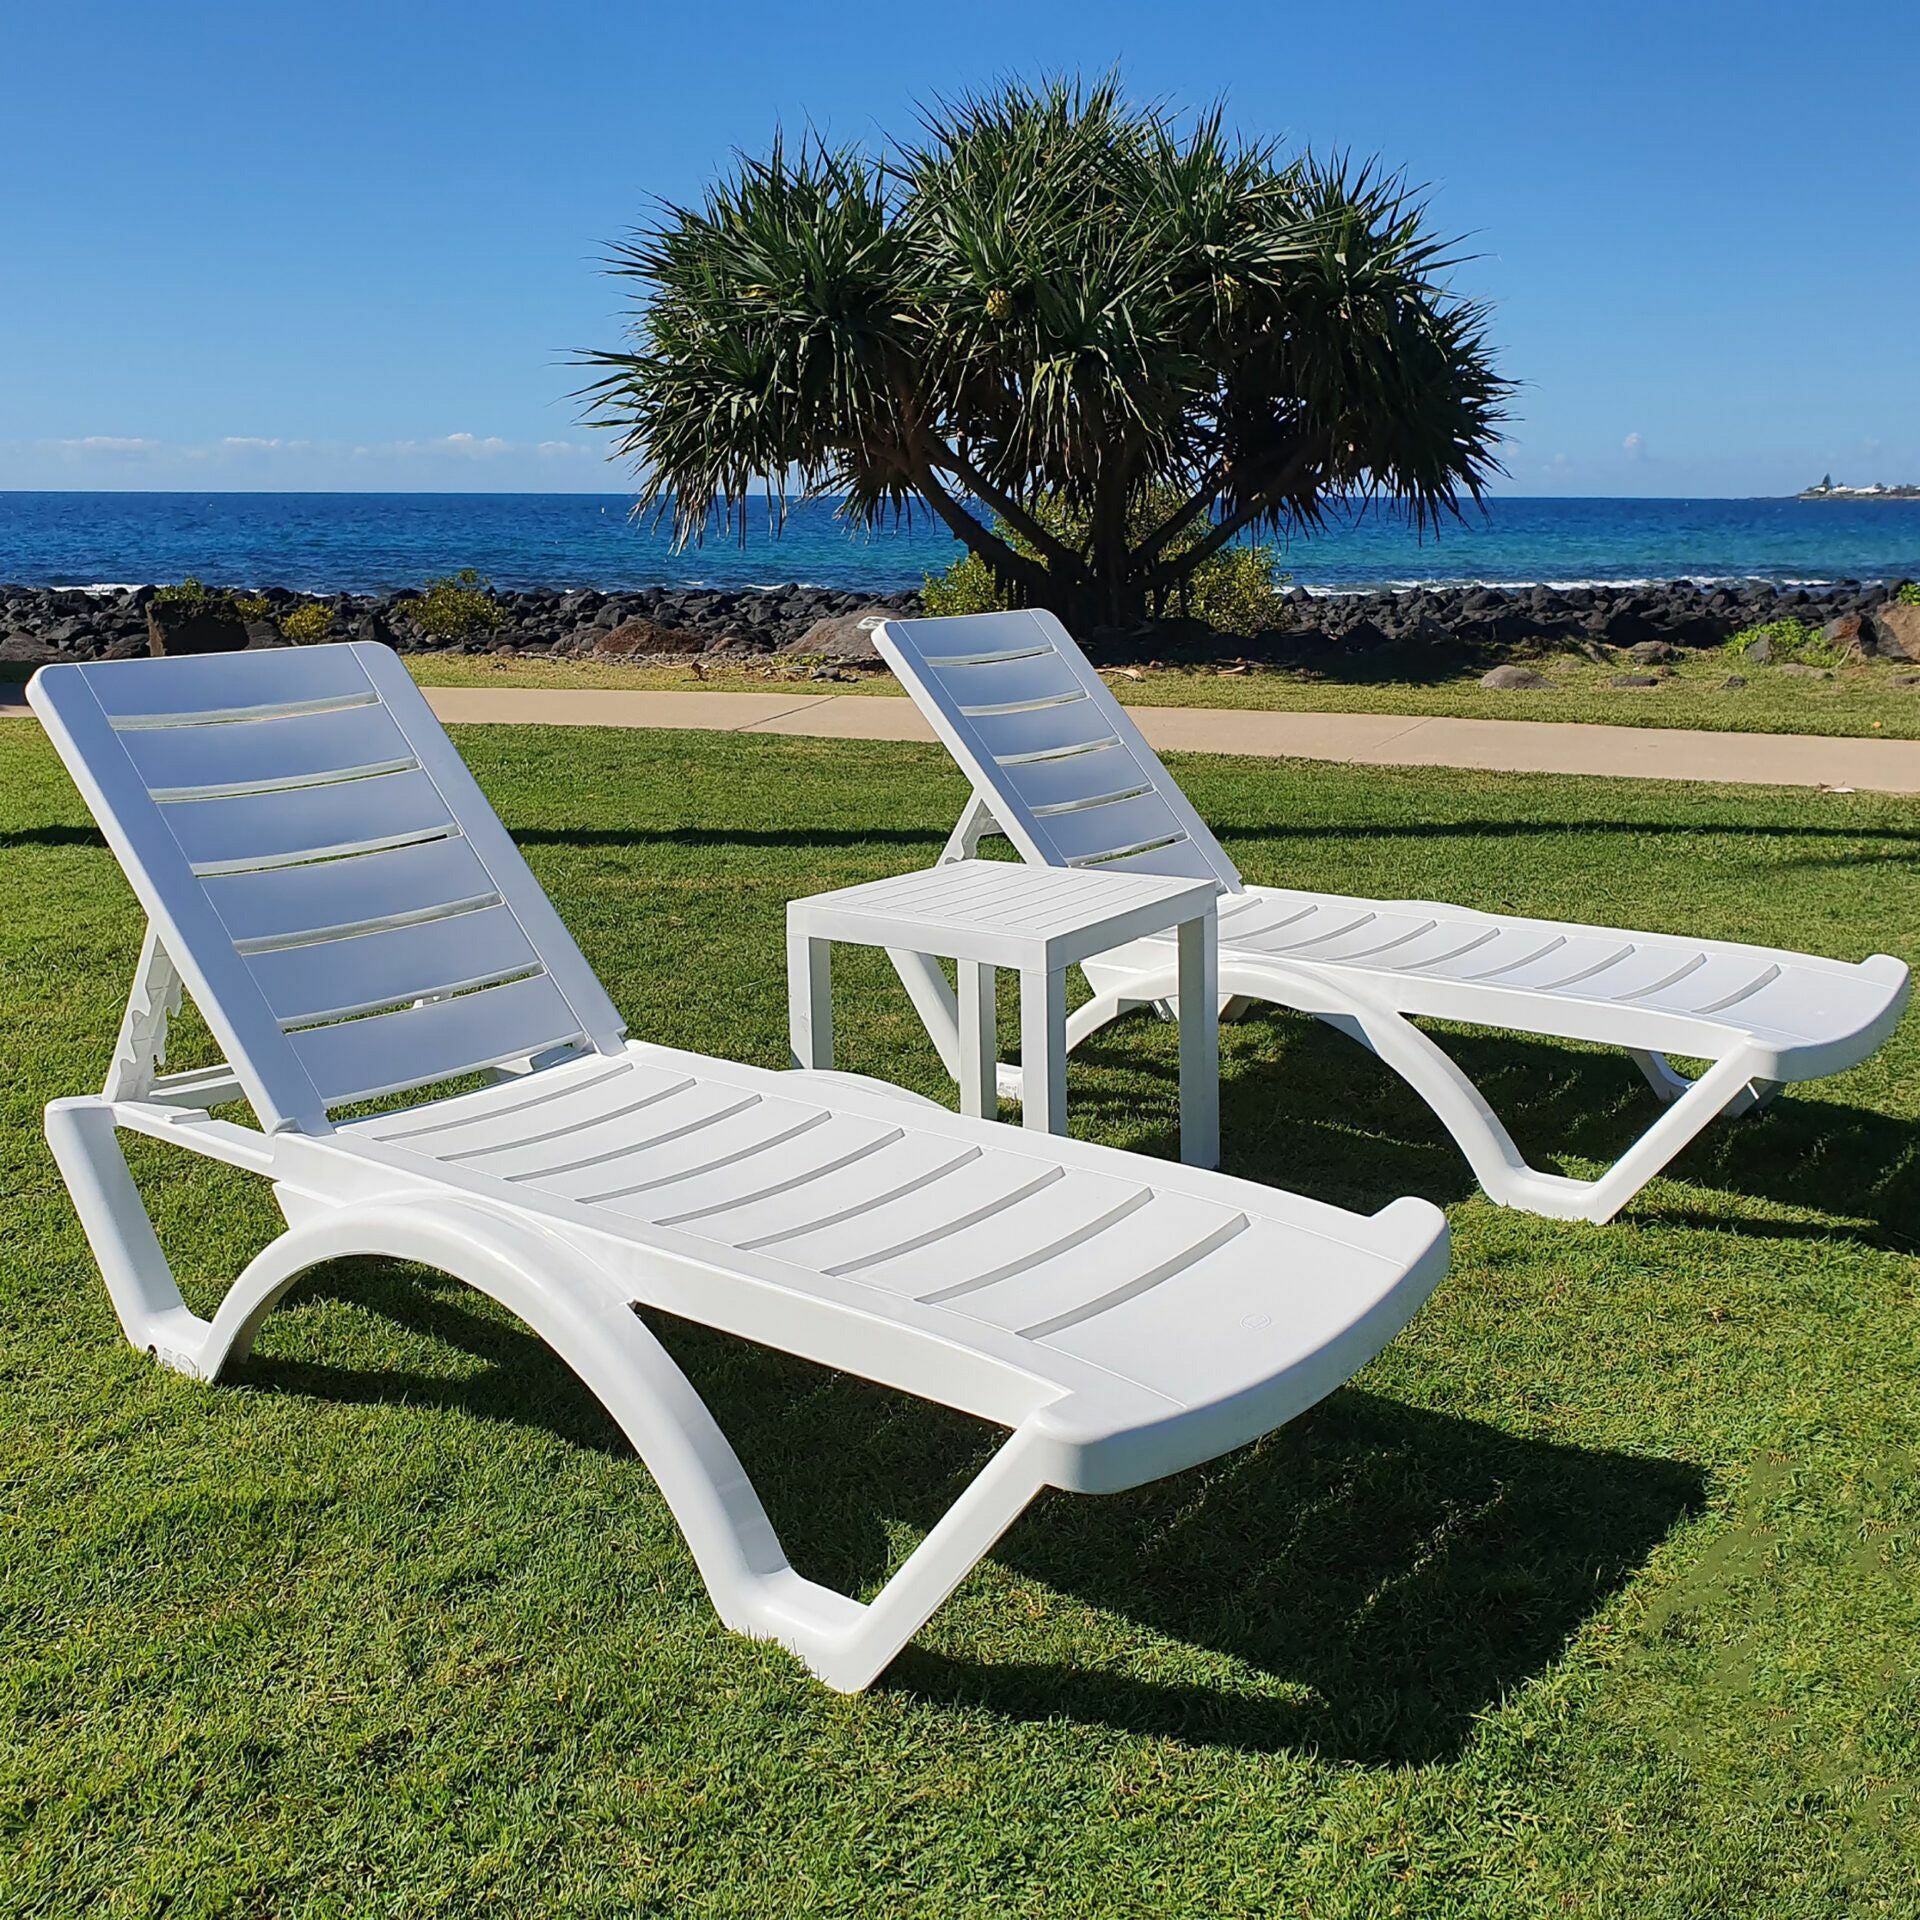 Bali Sunlounger 3 Piece Package with Side Table - White